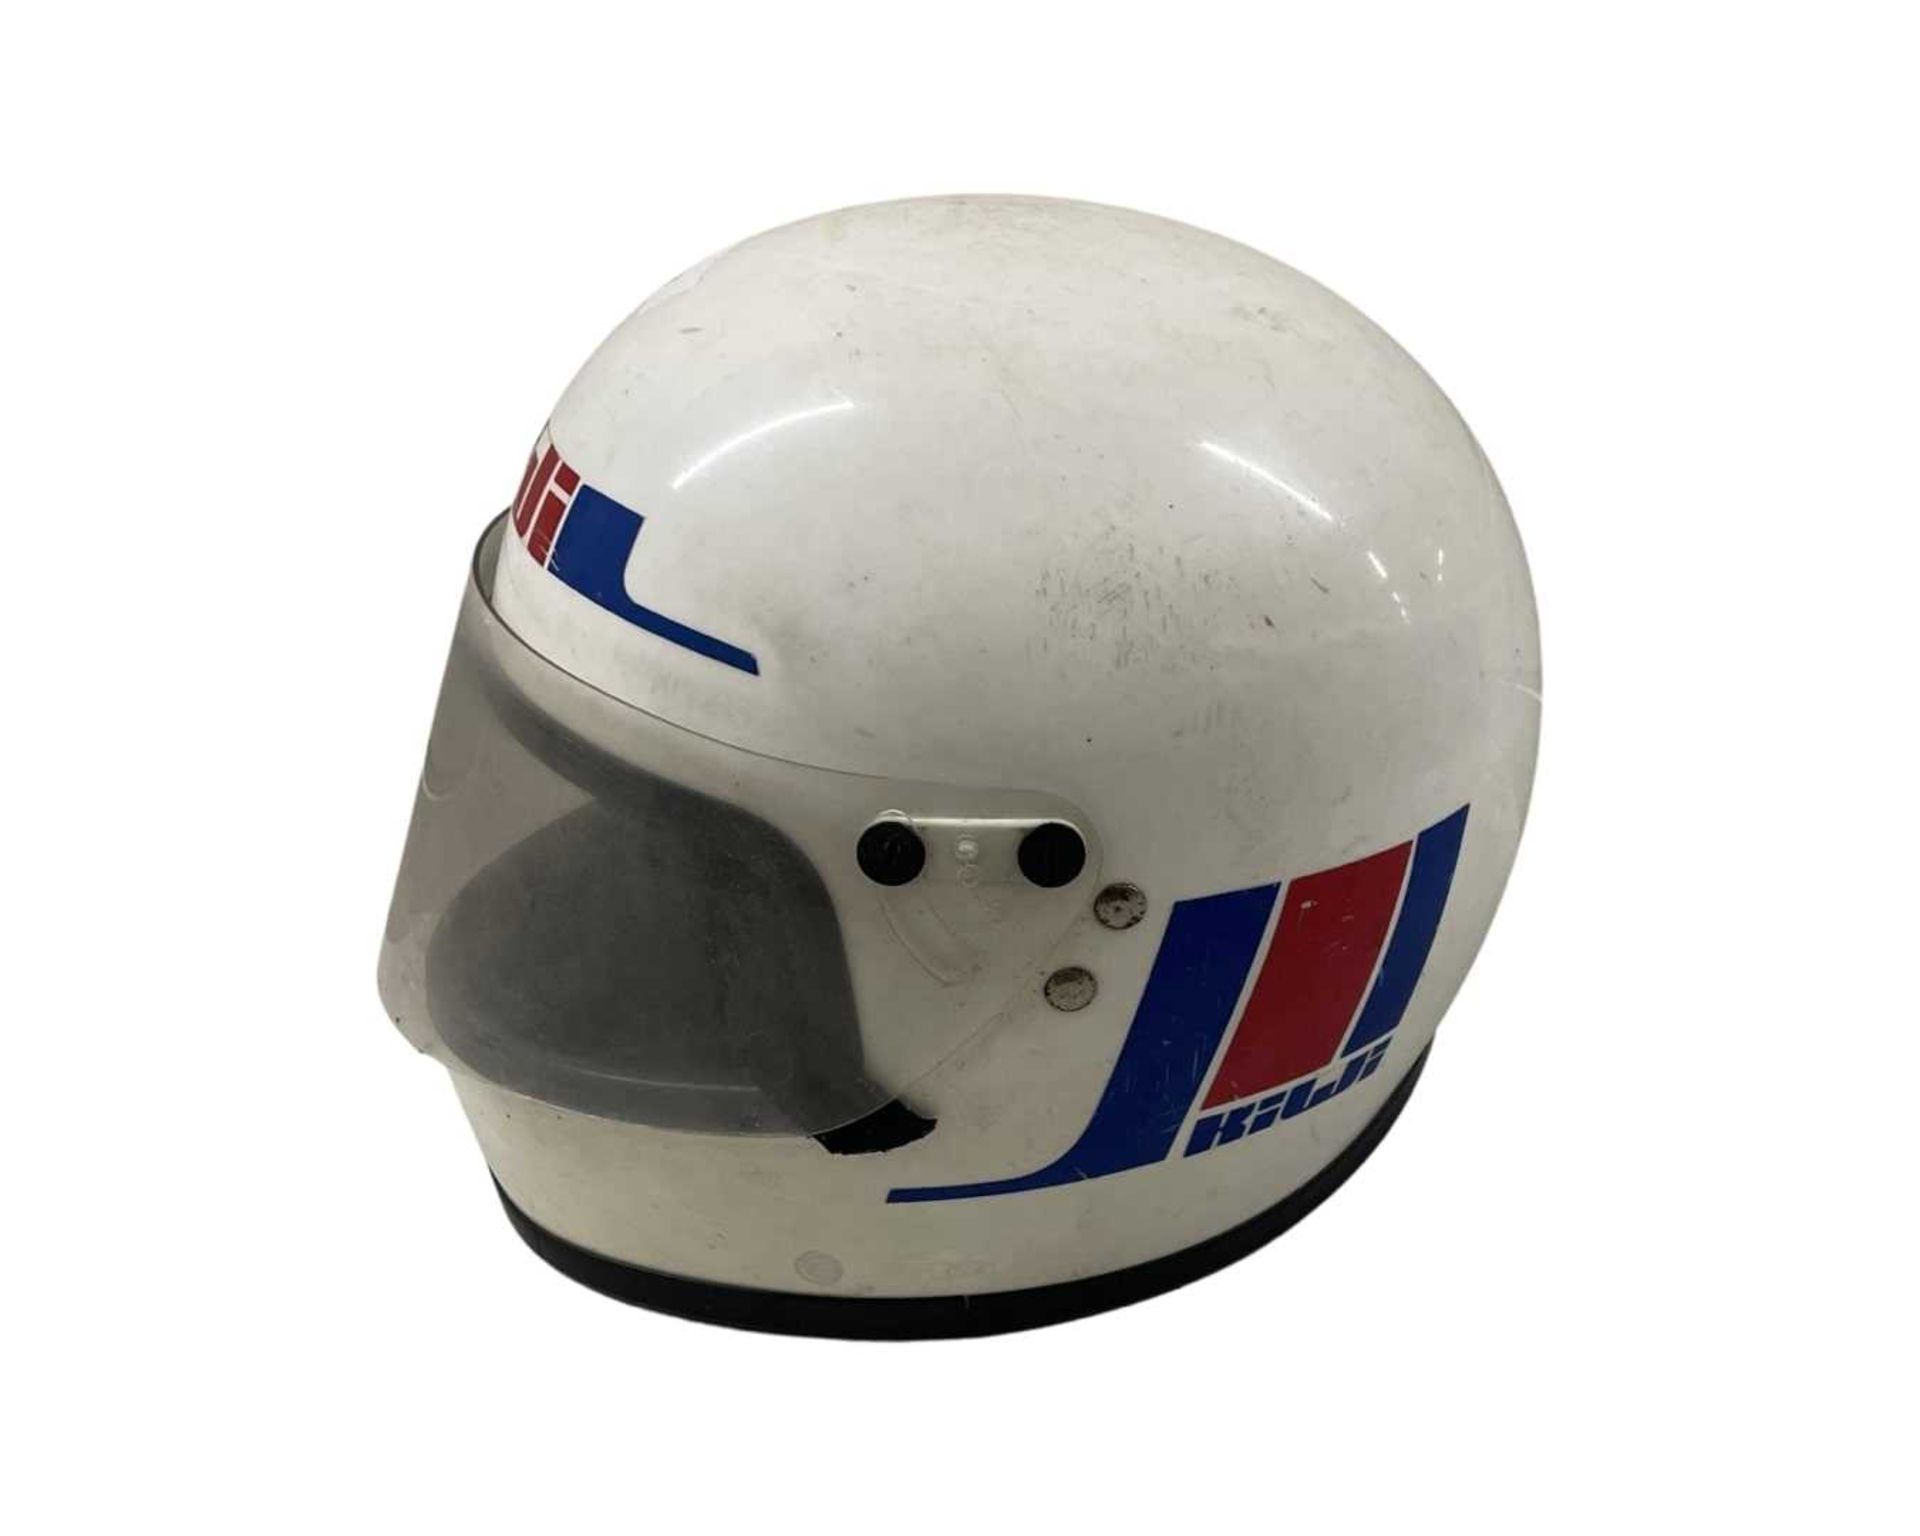 1970's crash helmet (for display purposes/collecting only) - Image 2 of 3